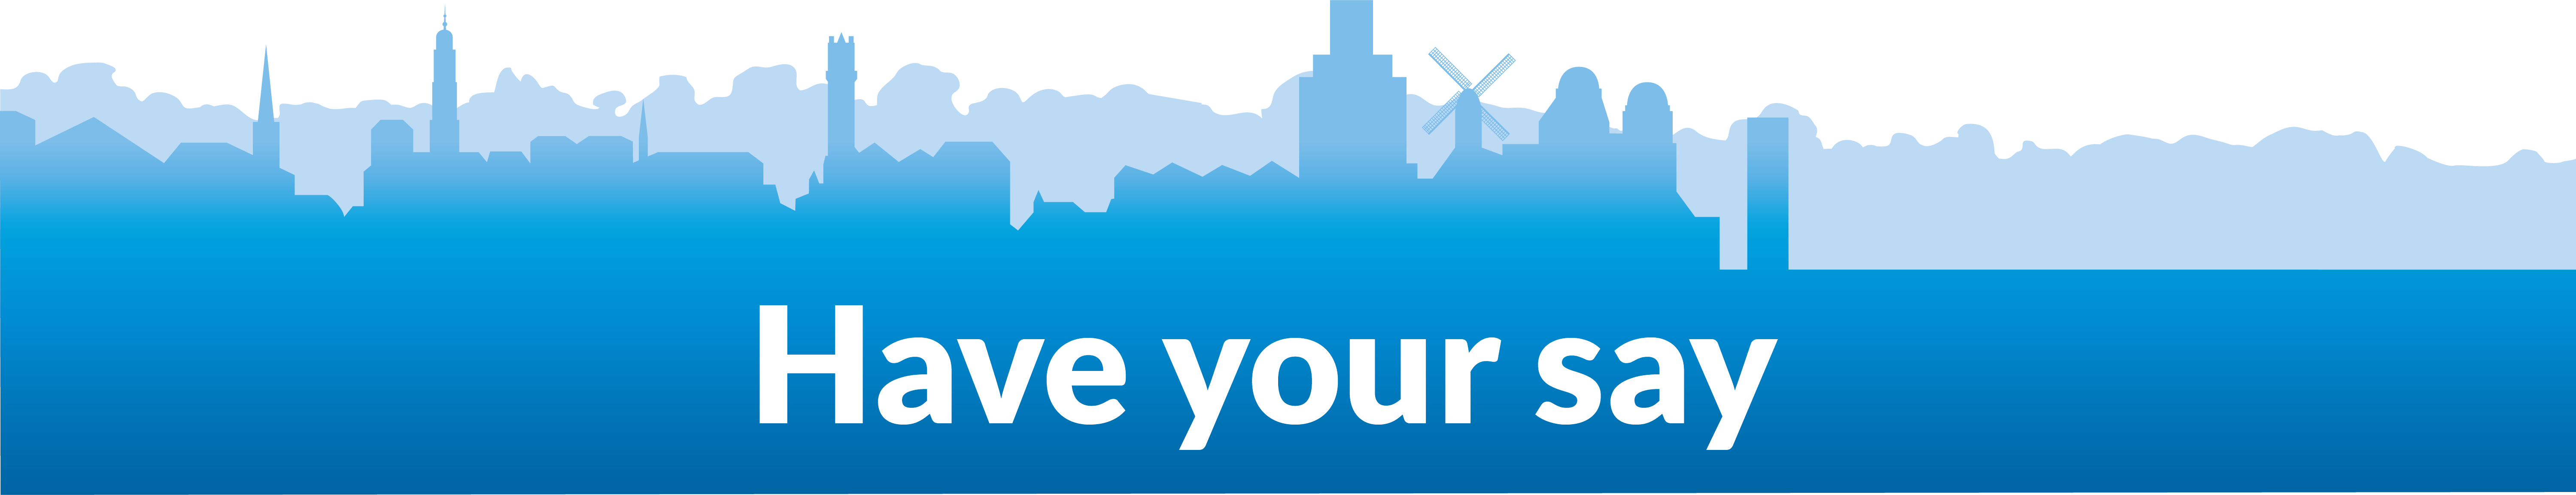 Have your say website banner